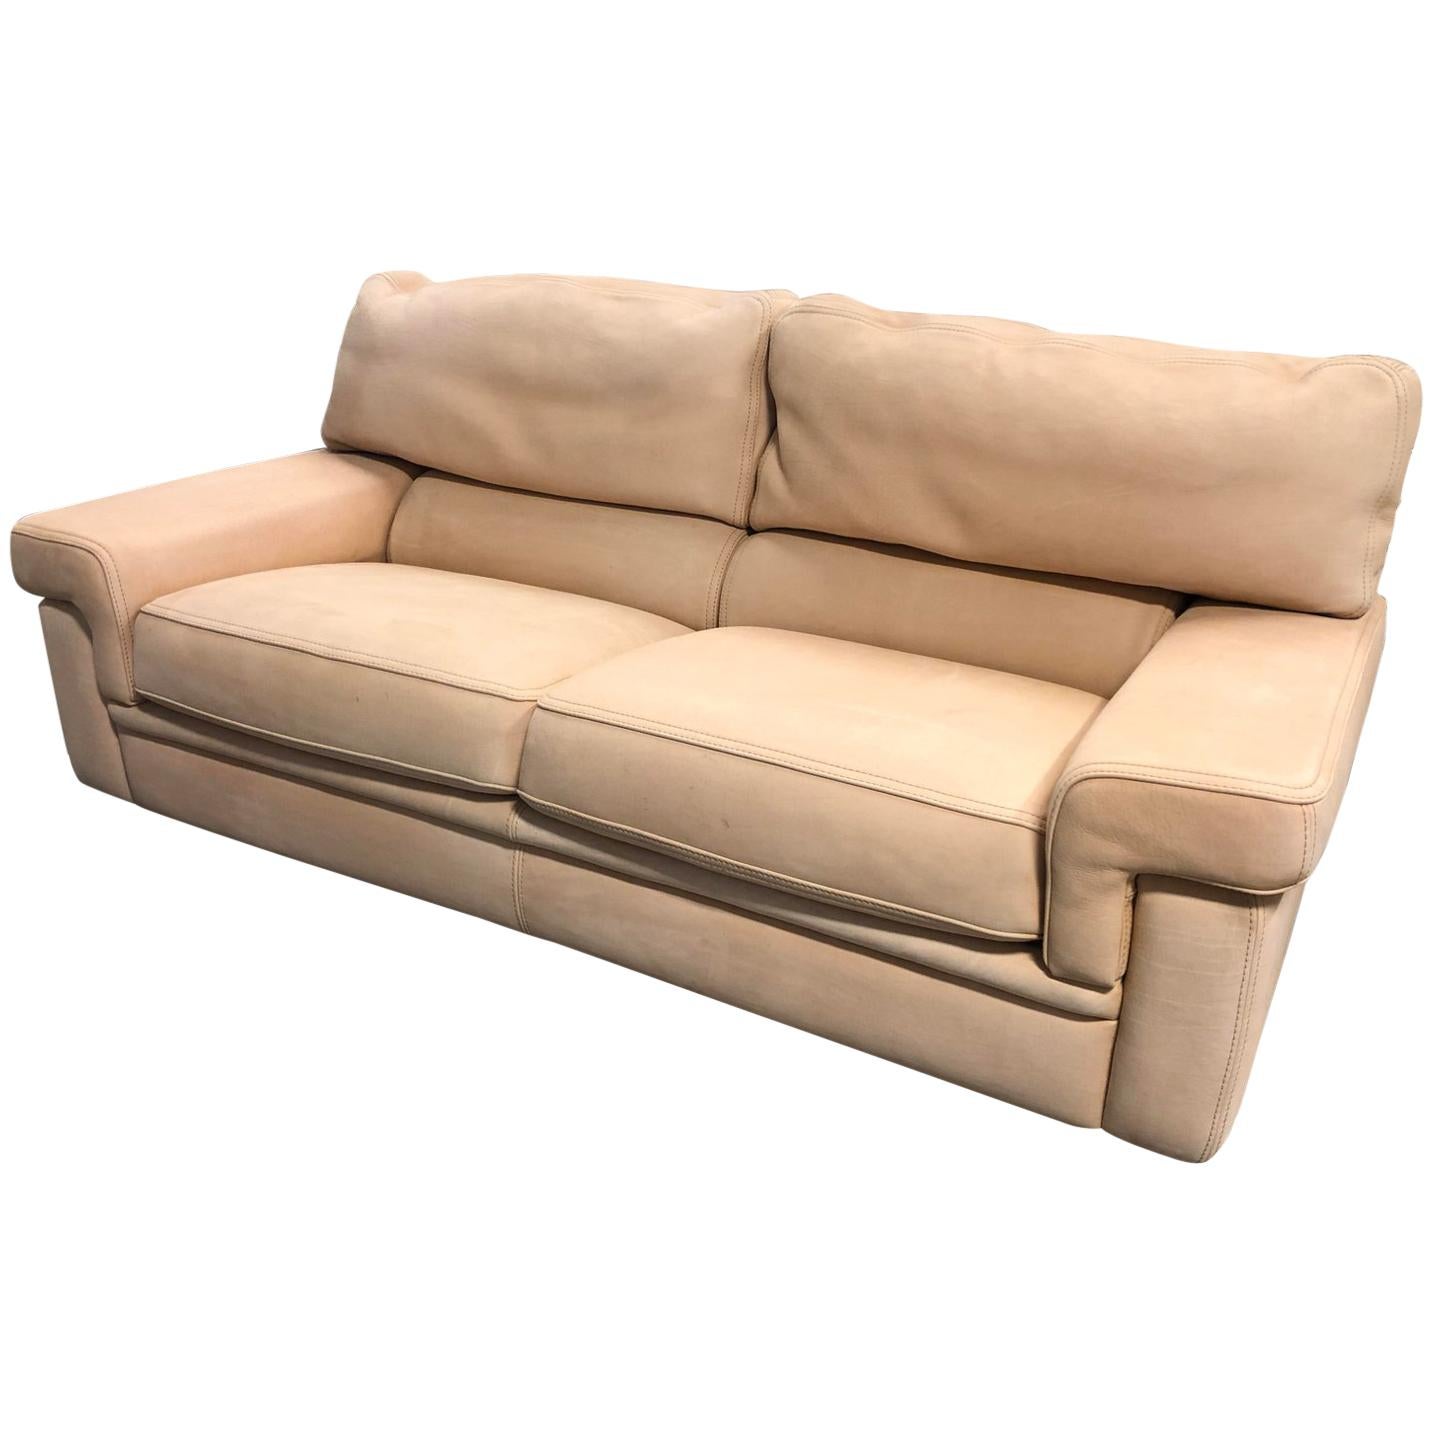 Roche Bobois Particuliere Leather Loveseat For Sale